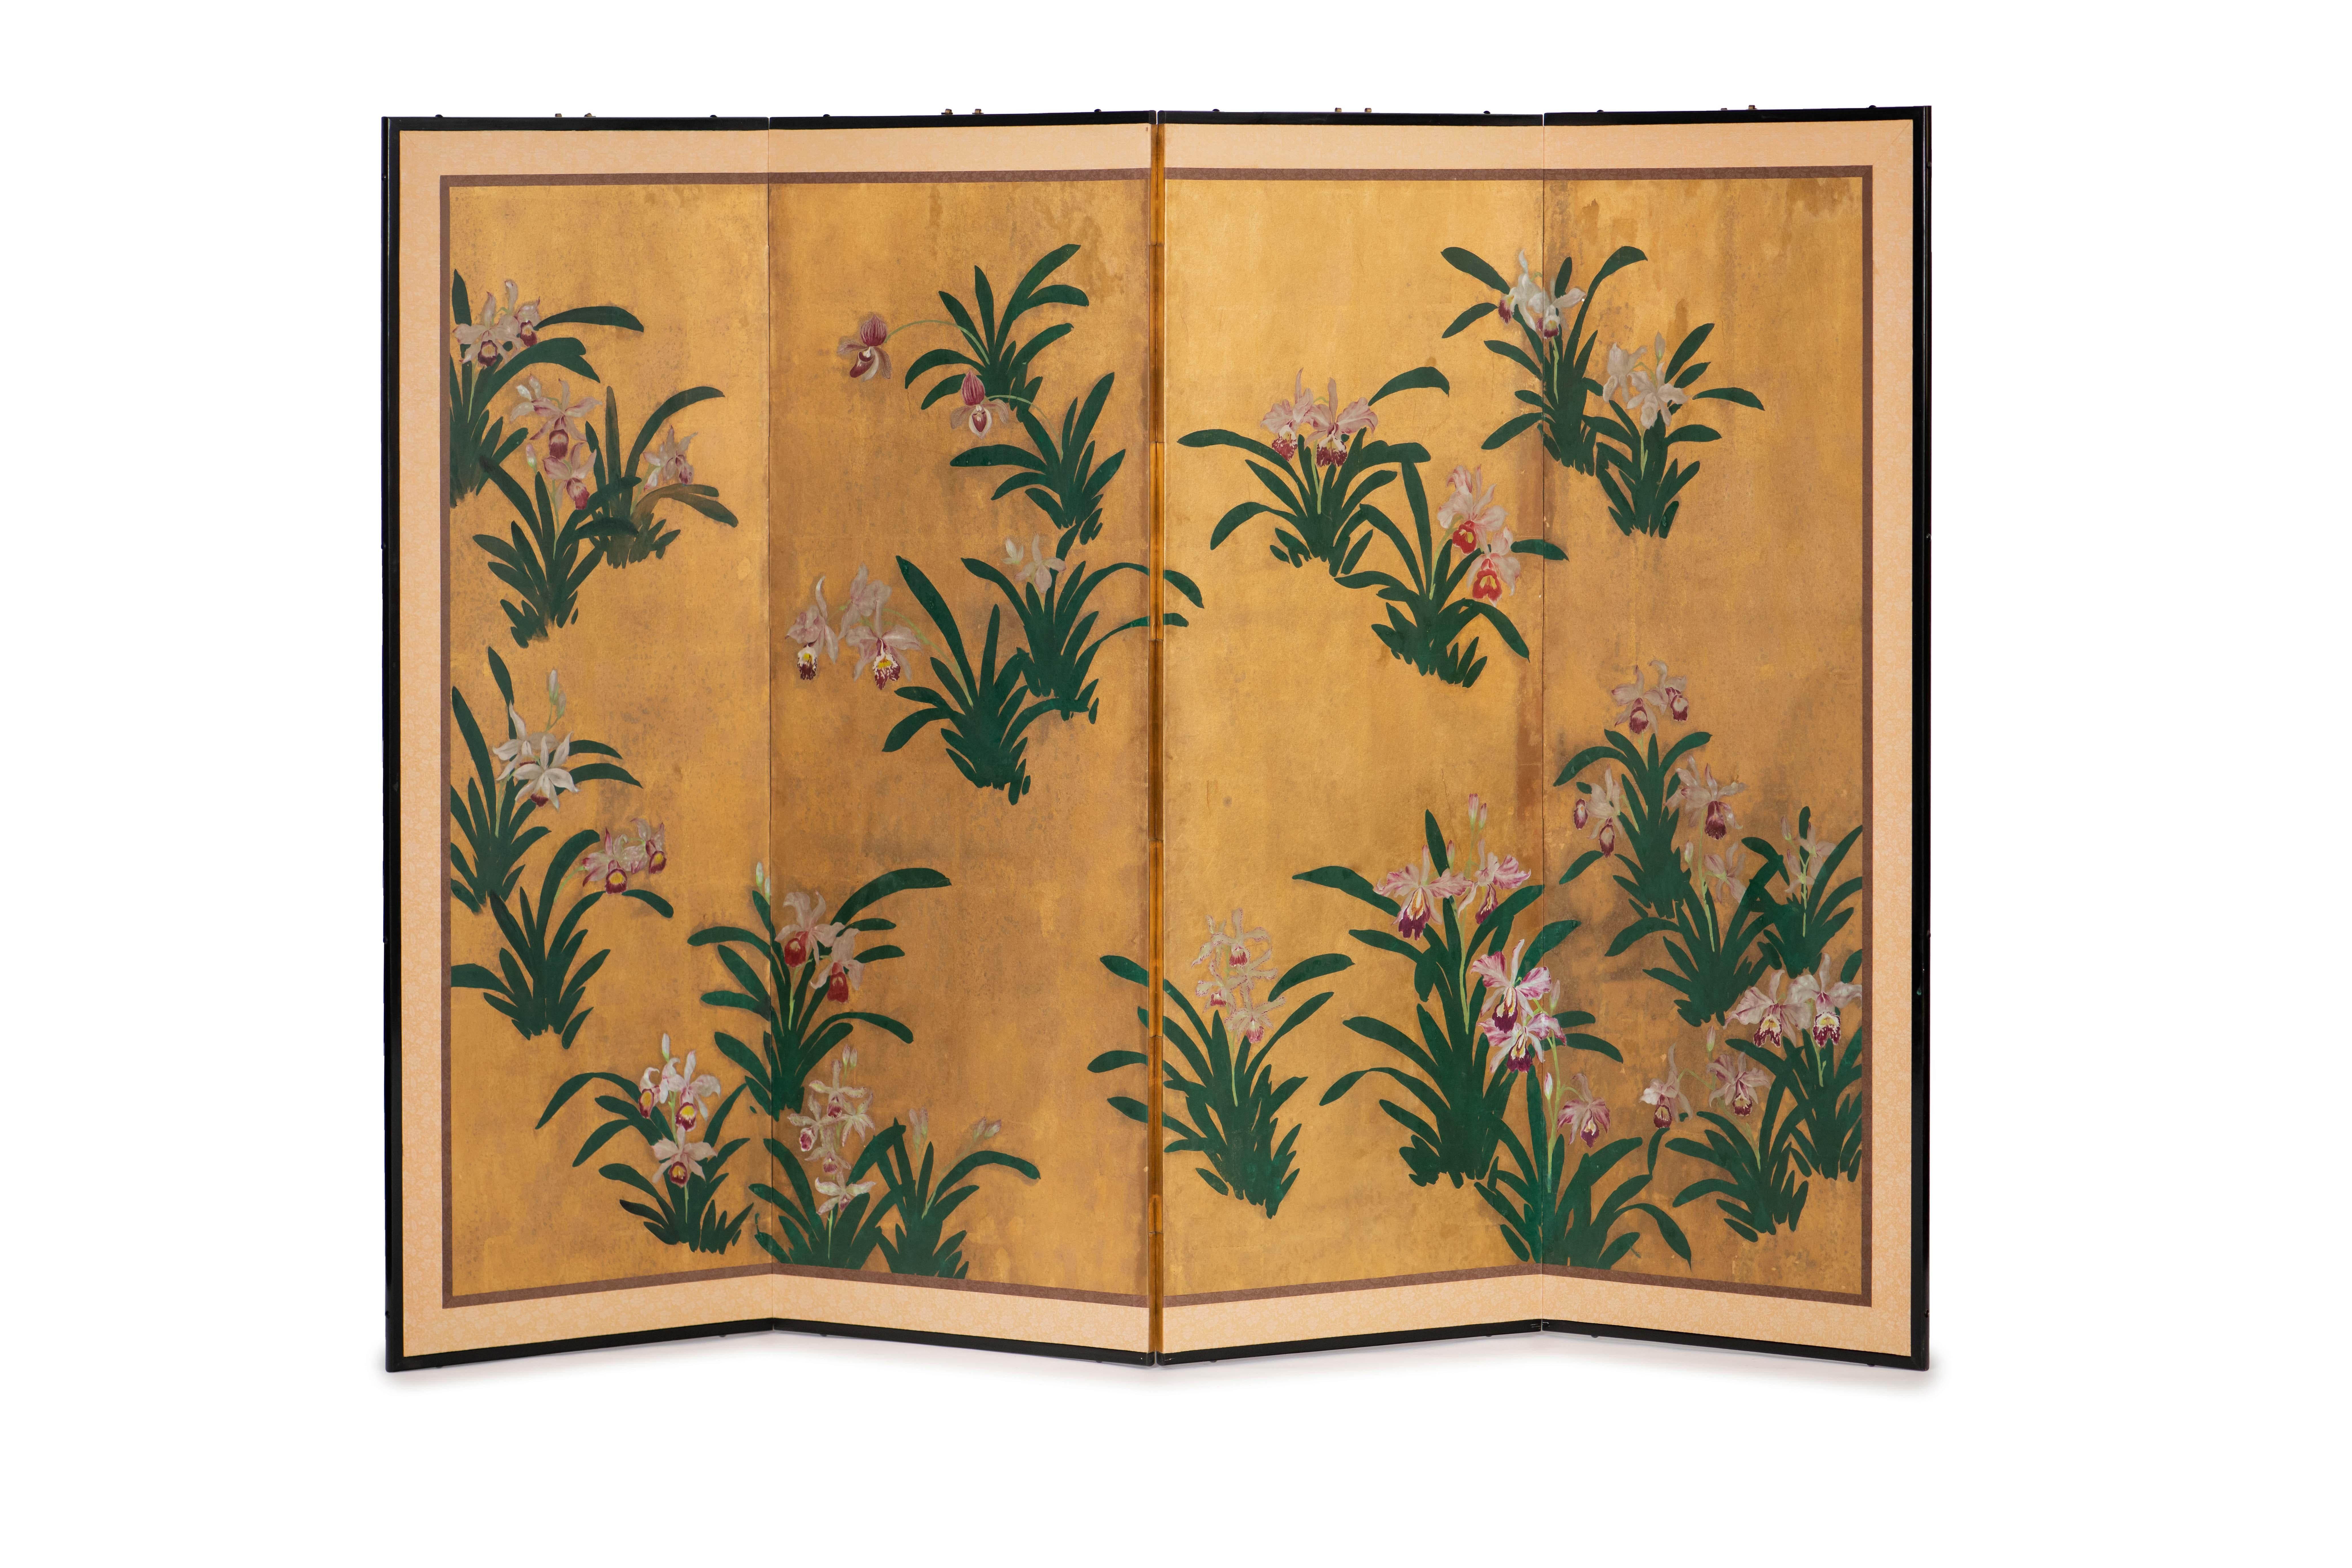 The scattered orchids painting of this four-panel screen is hand-painted in watercolor, on squares of gold leaf which are applied by hand to the paper base over carefully jointed wooden lattice frames. Lacquer rails are then applied to the perimeter